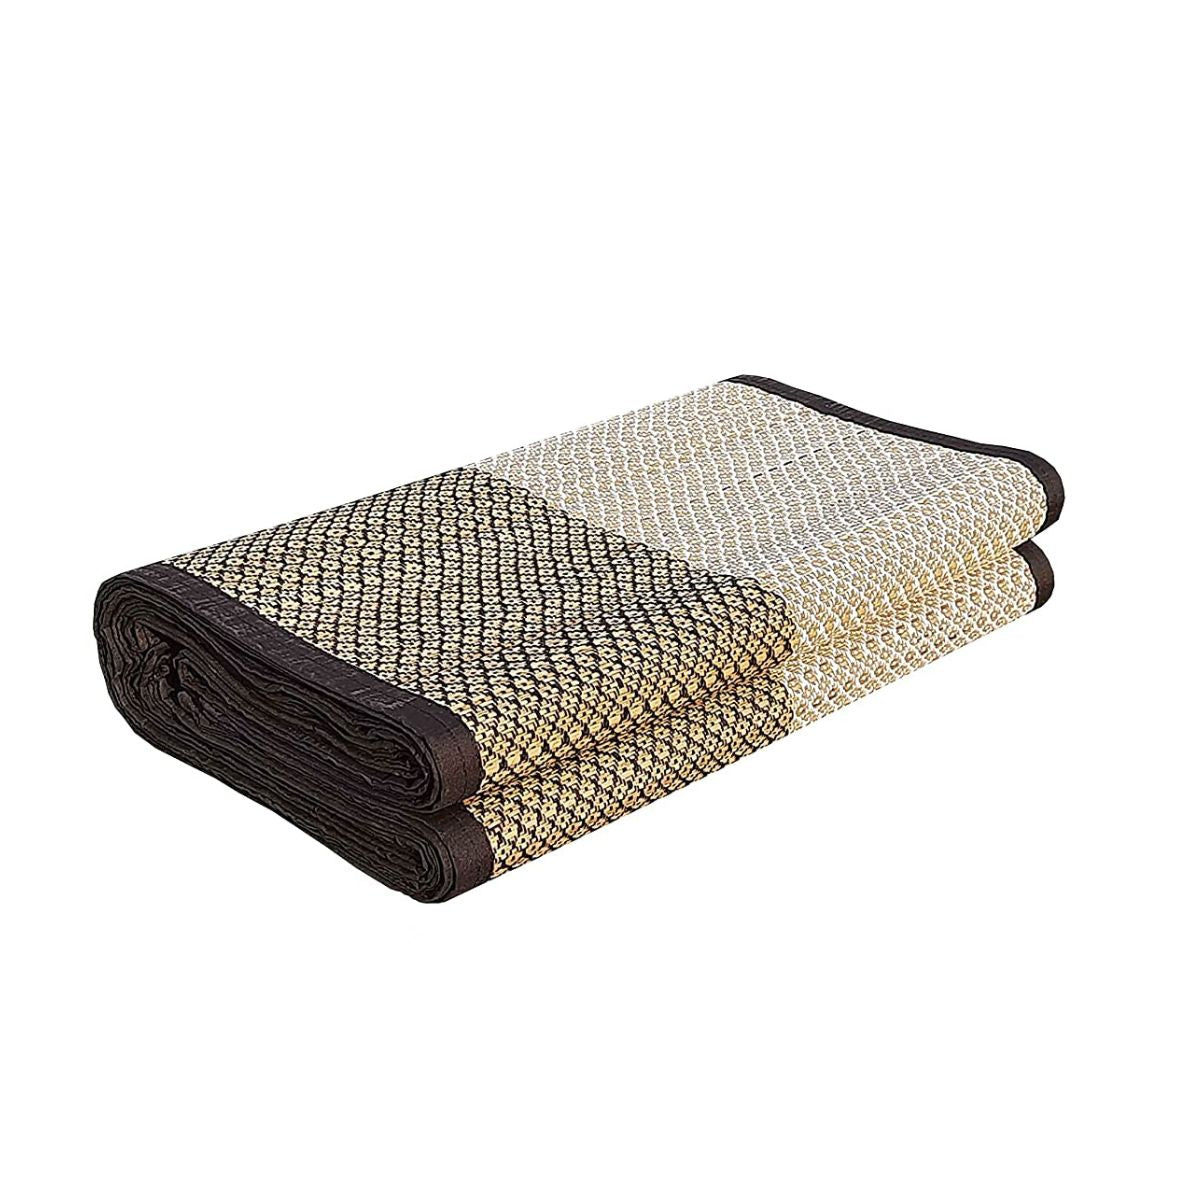 Chatai Mat Foldable handwoven Organic made of Madurkathi Grass for Multipurpose Use - T3-12